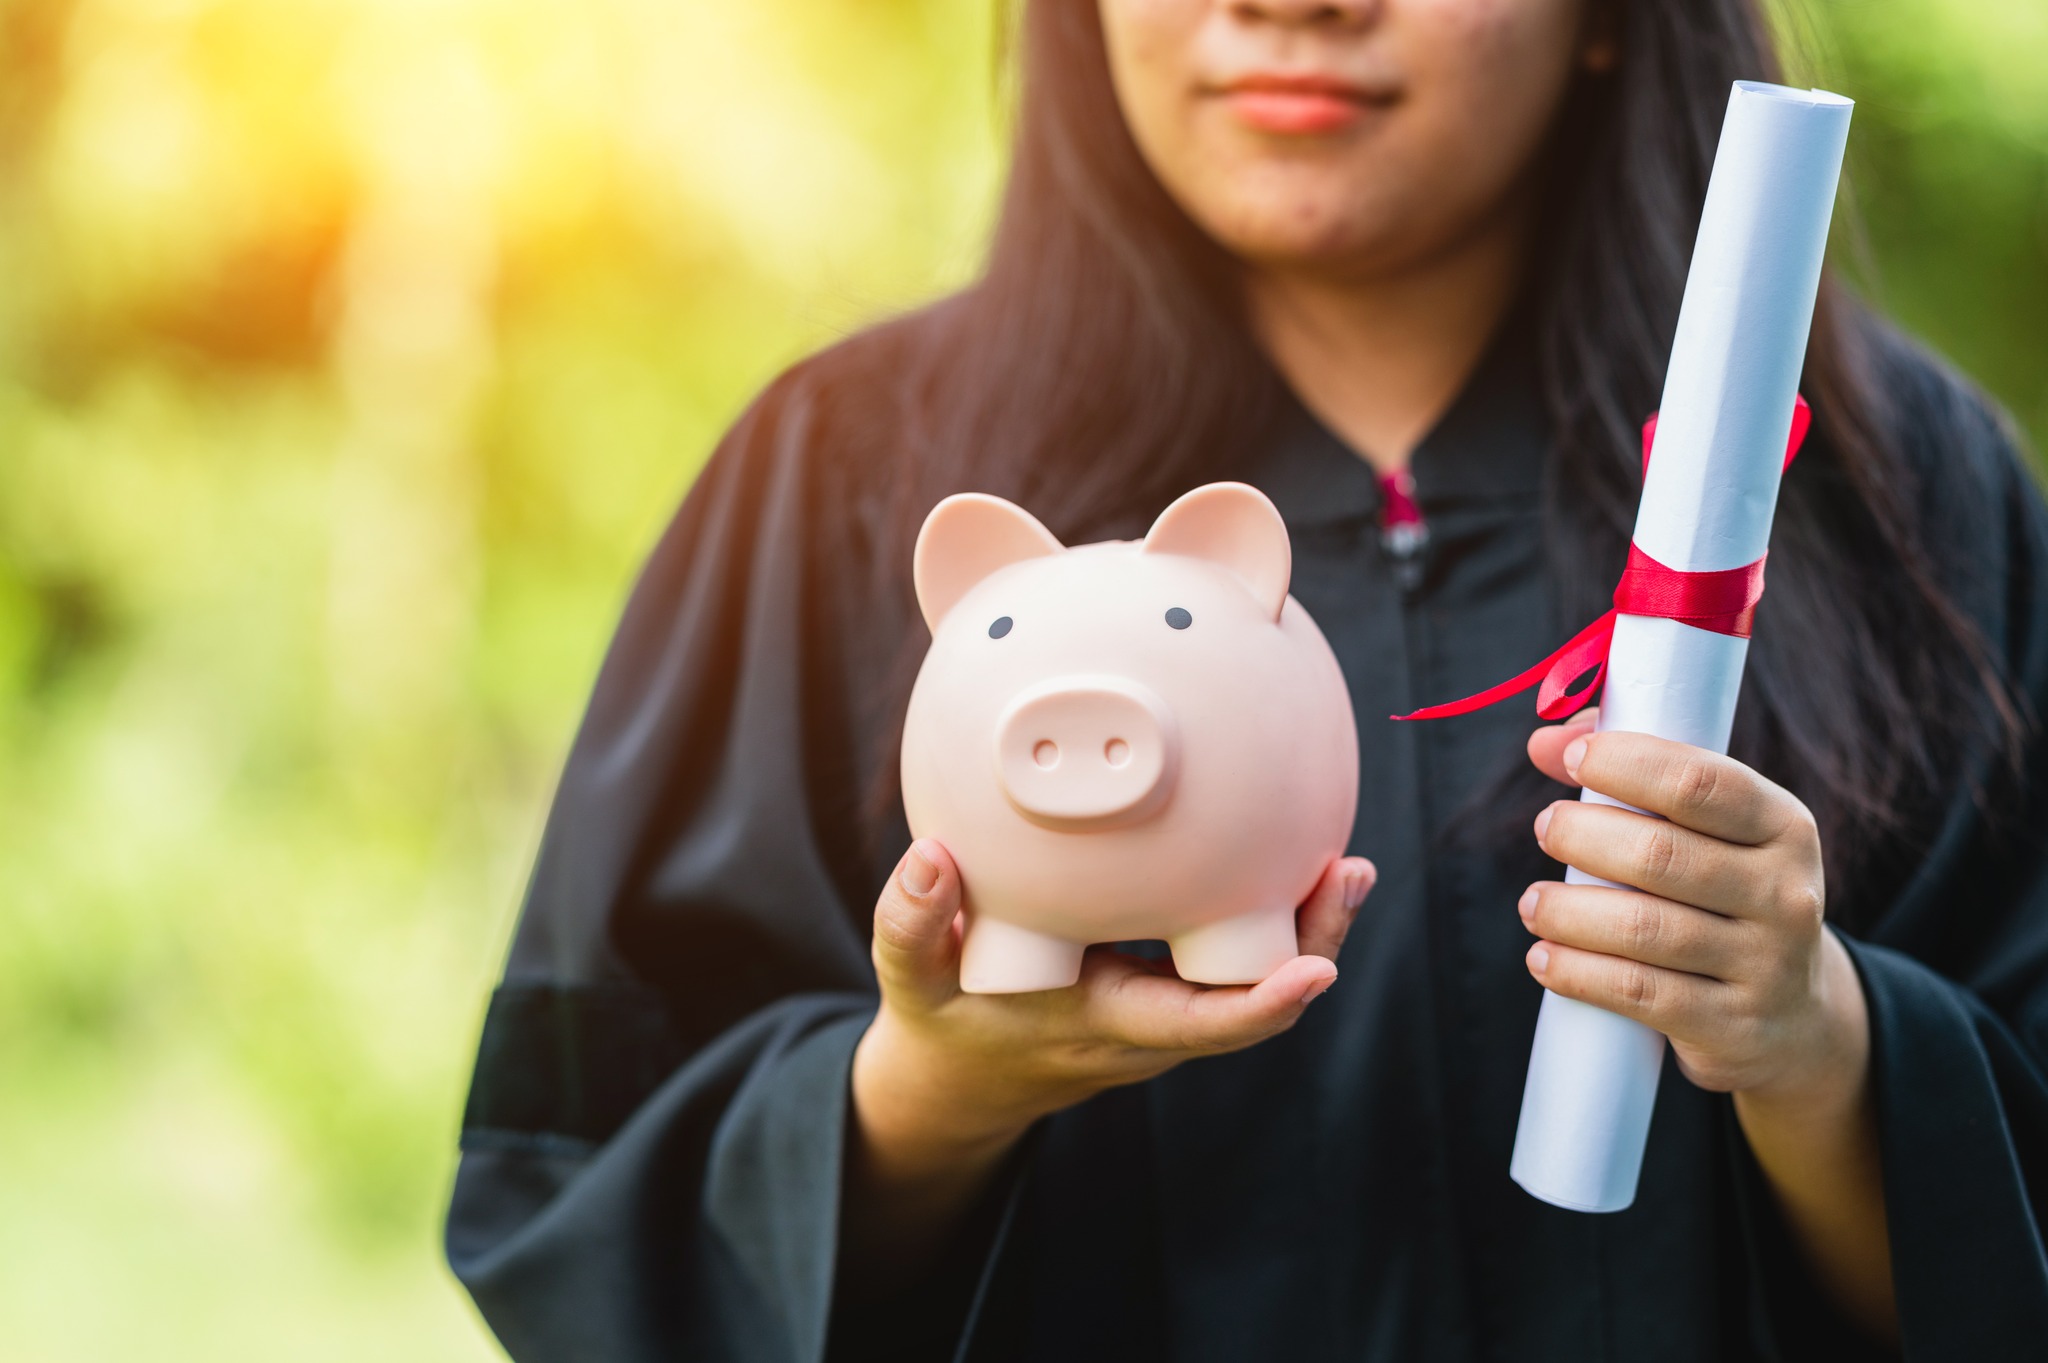 Image related with Planning a Budget Graduation Party? Here are 5 Quick Tips